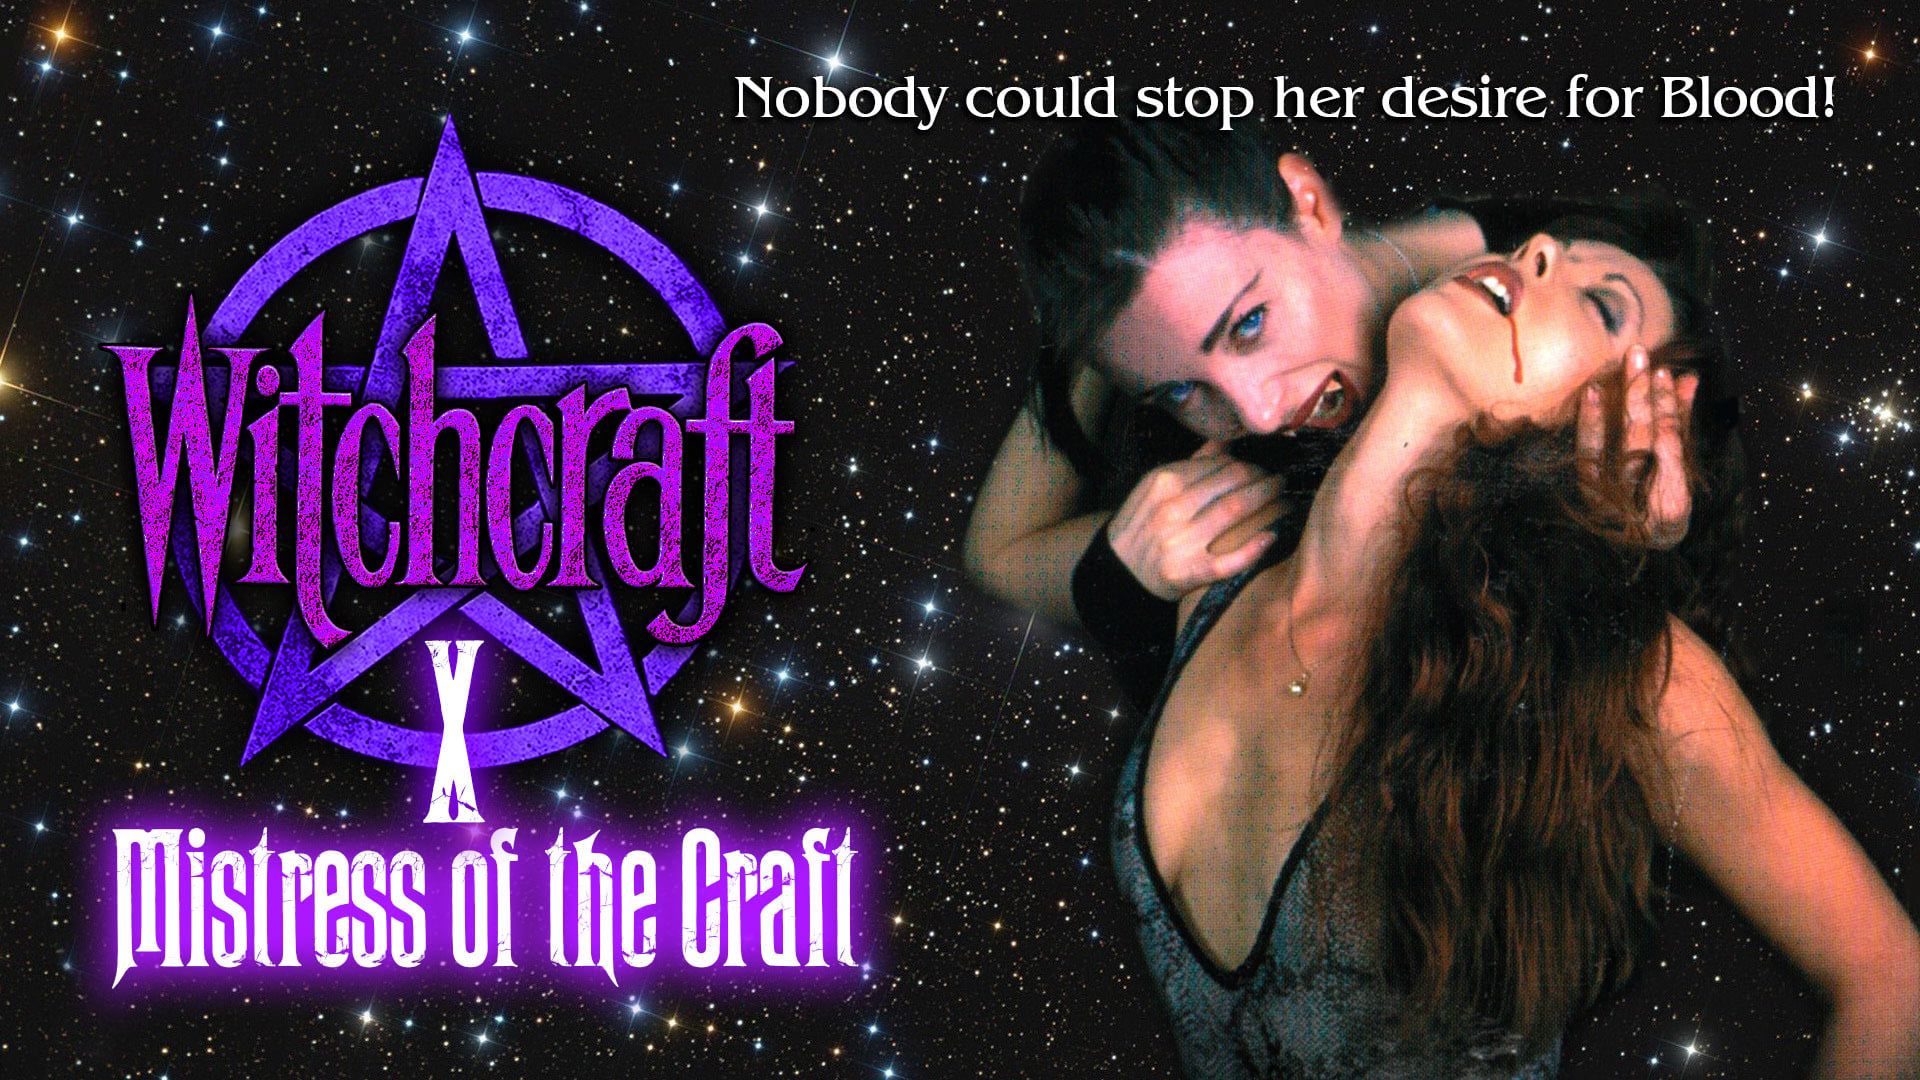 Witchcraft X: Mistress of the Craft background